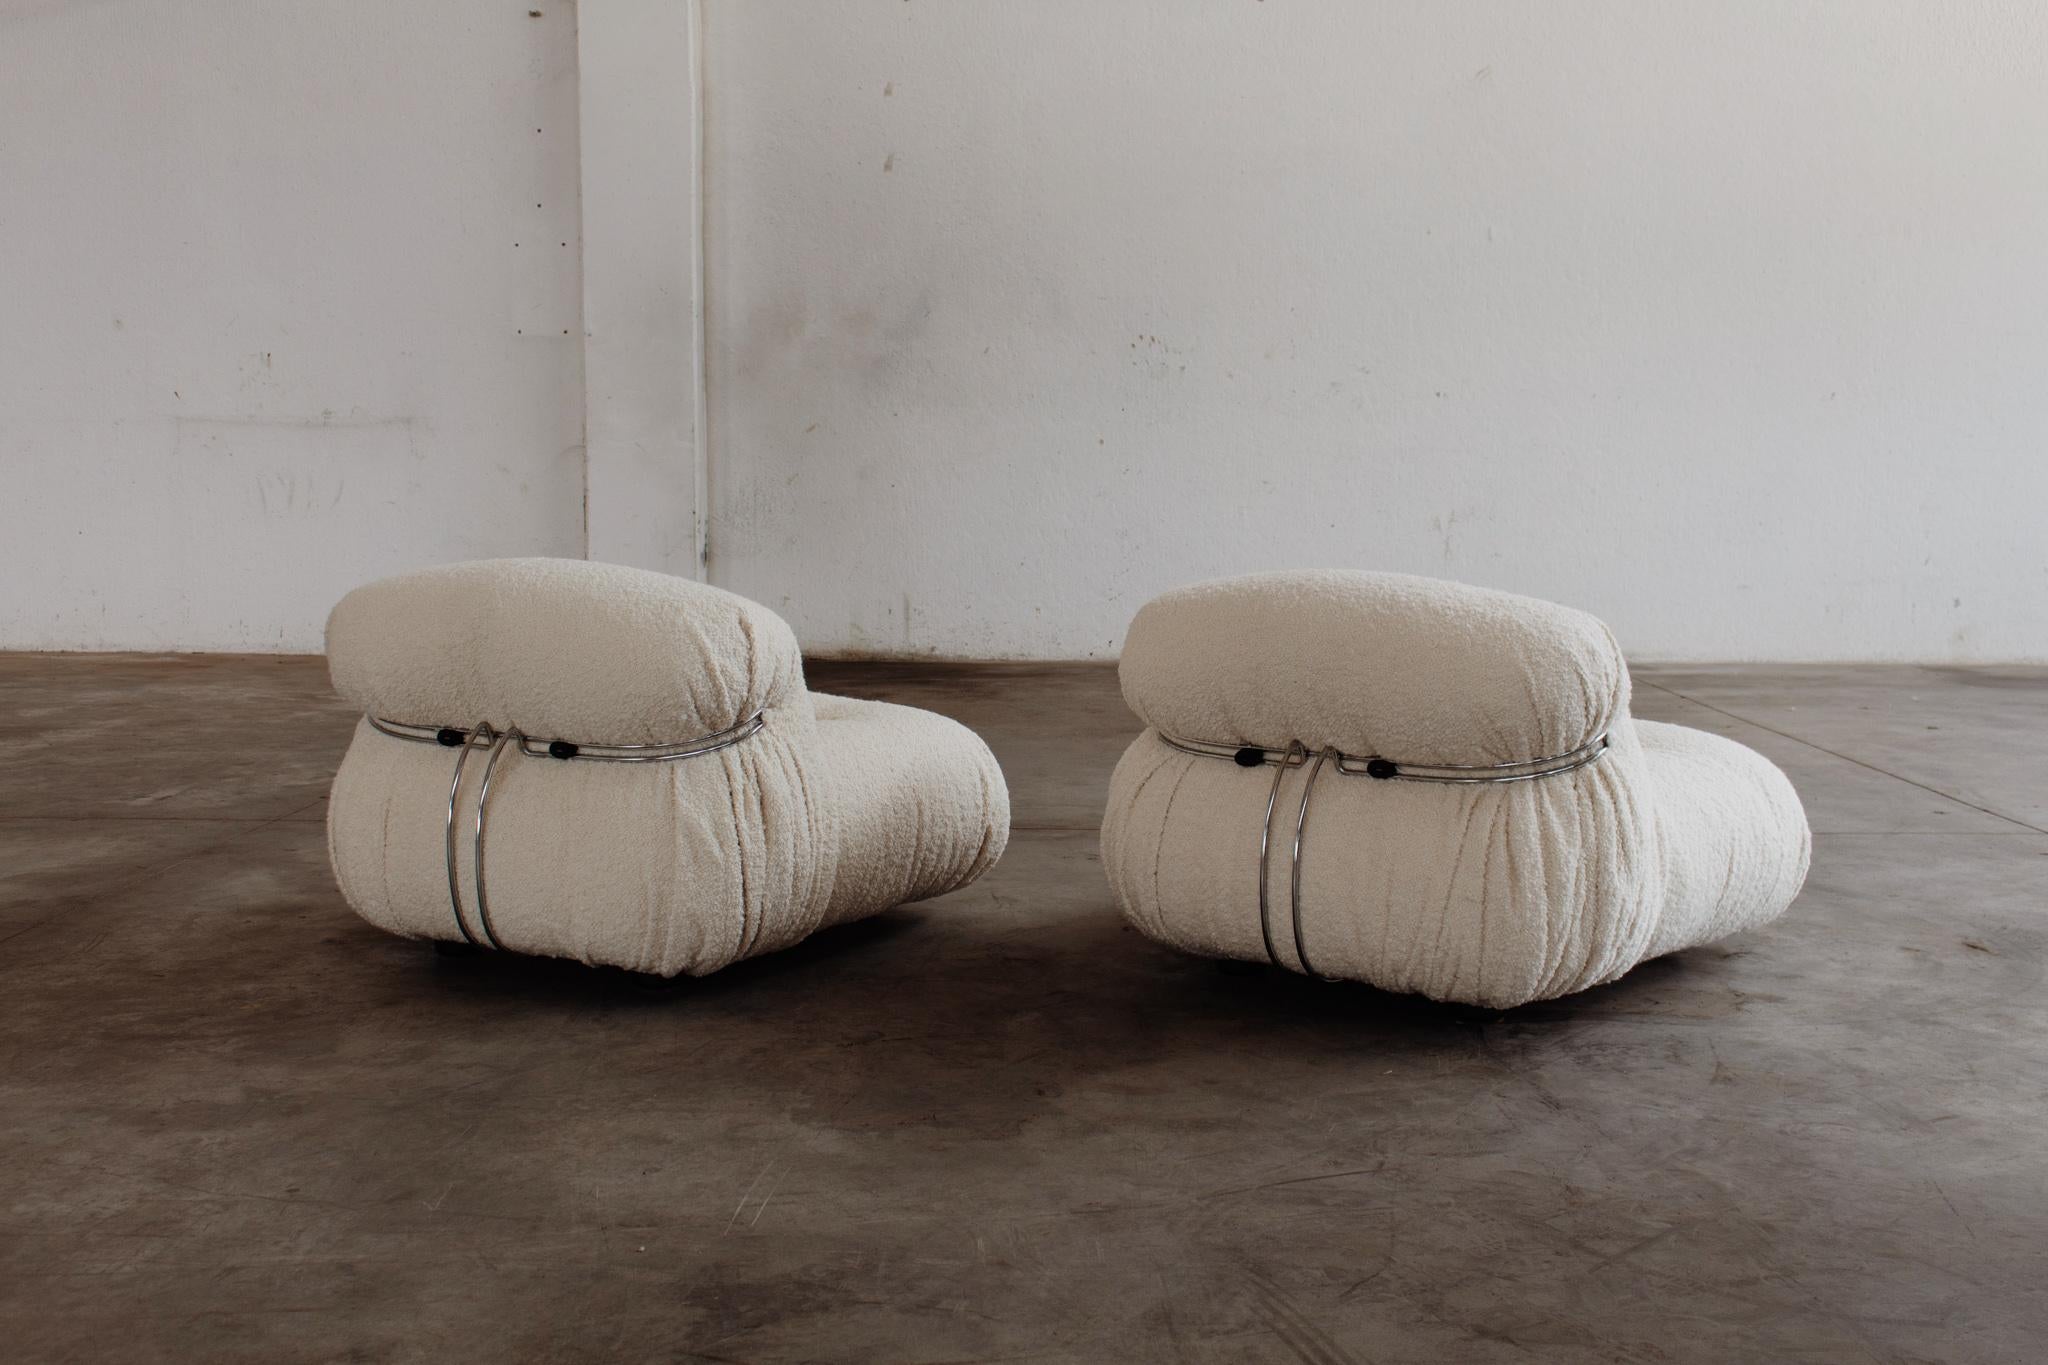 Mid-20th Century Afra & Tobia Scarpa “Soriana” Chairs for Cassina, Bouclé Wool, 1969, Set of 2 For Sale